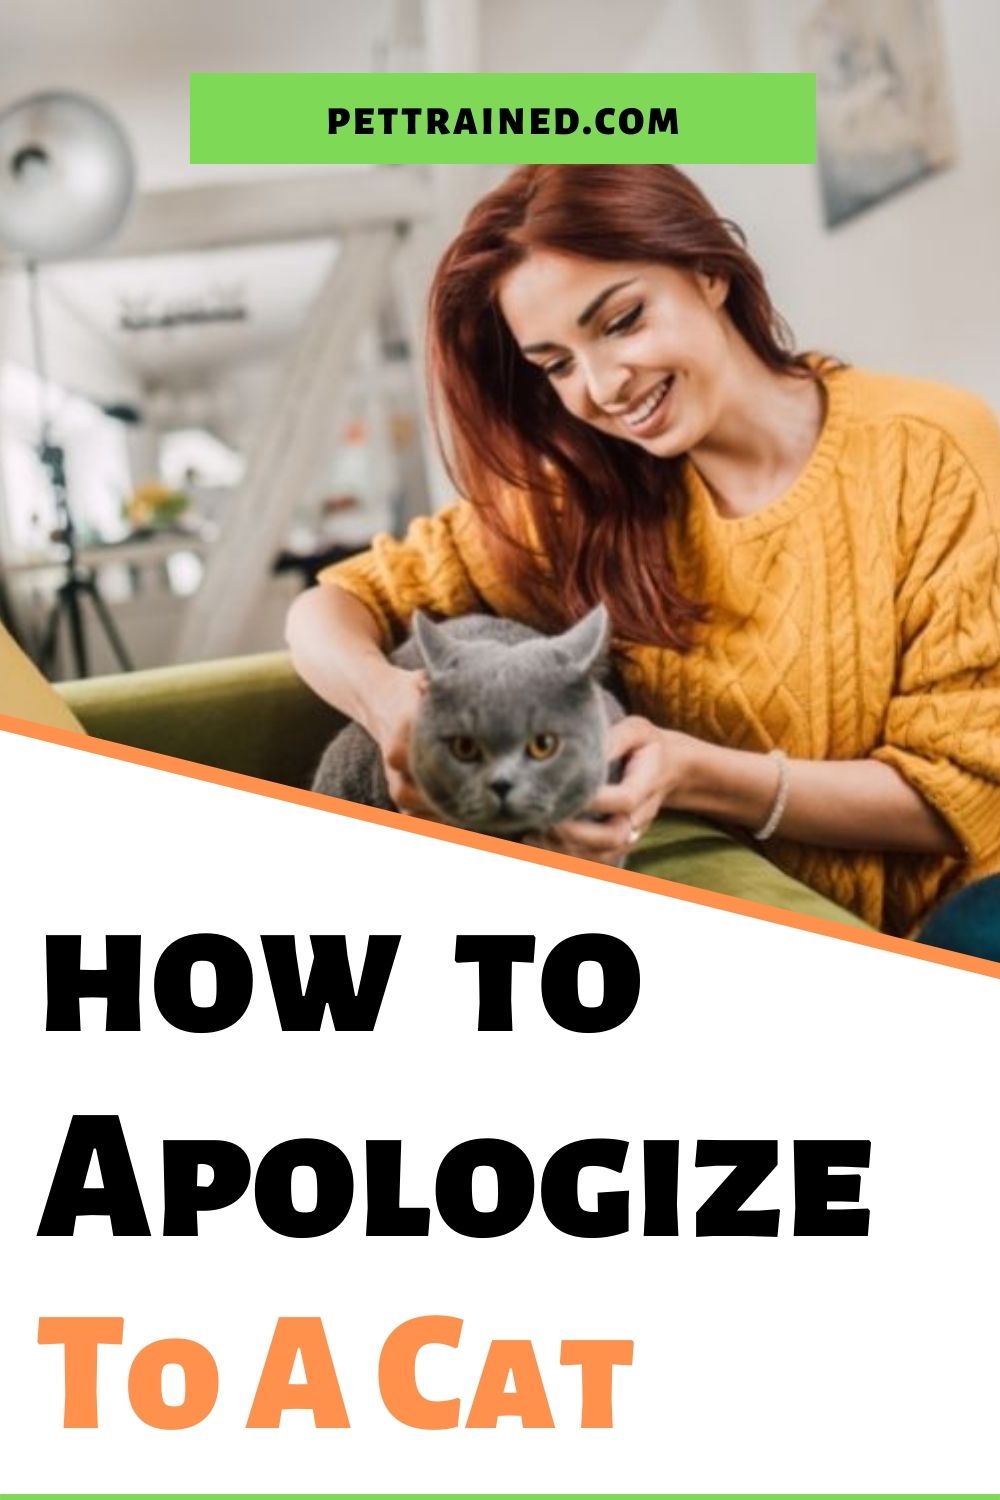 How to apologize to a cat